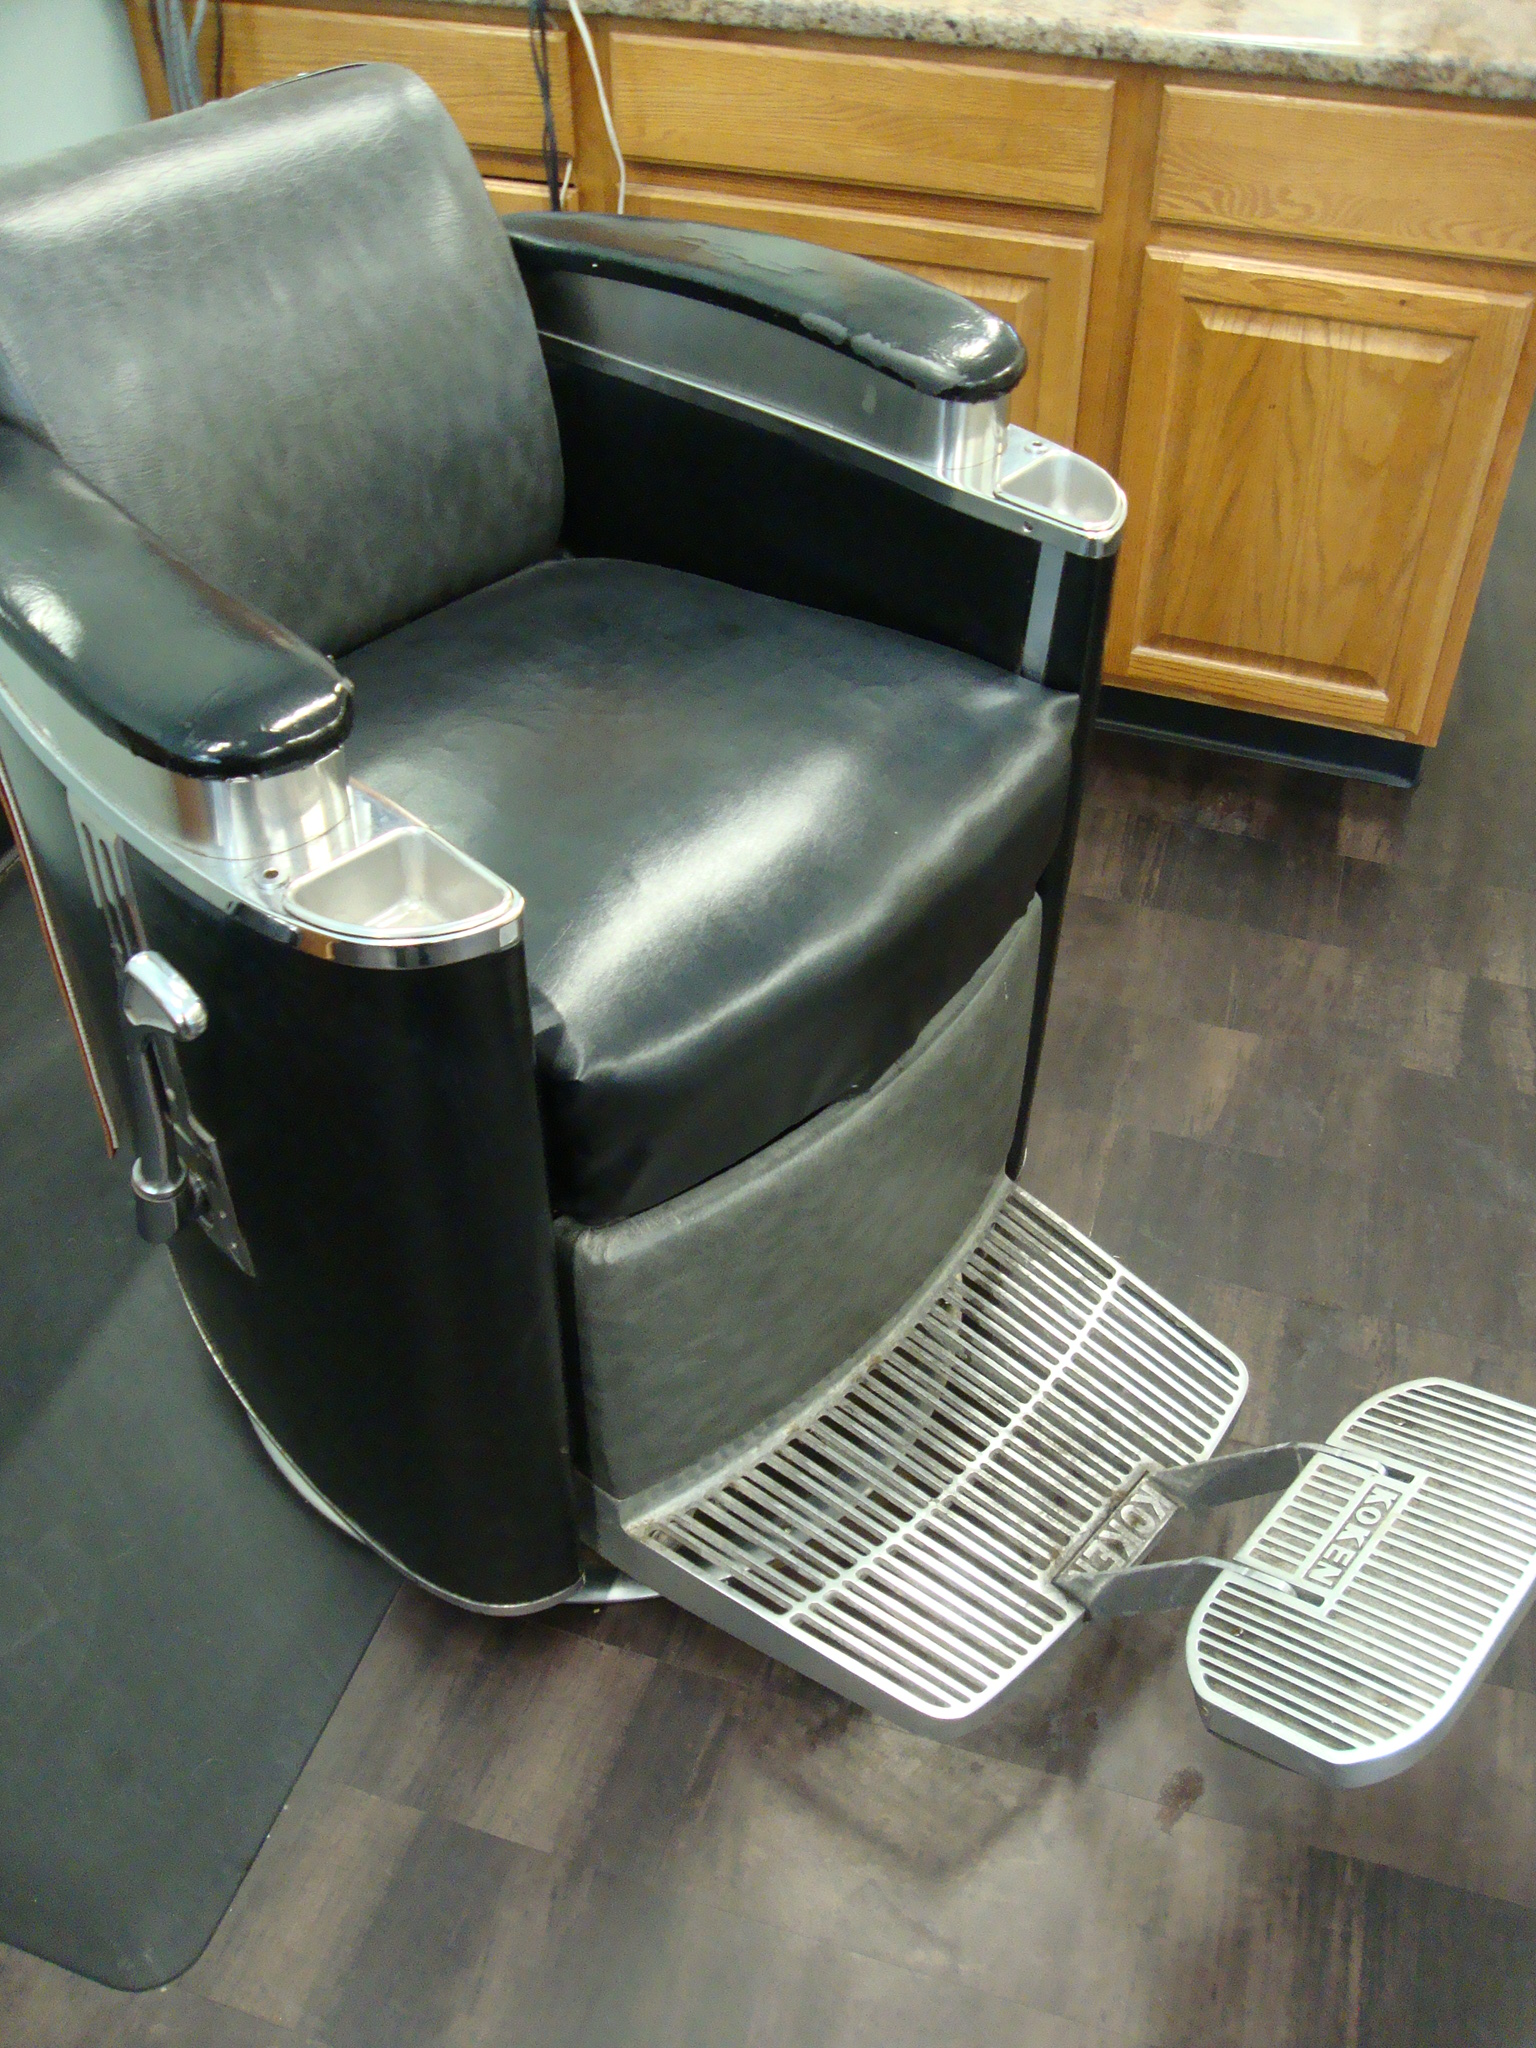 Becky's chair - Rockin' Old School barber style!